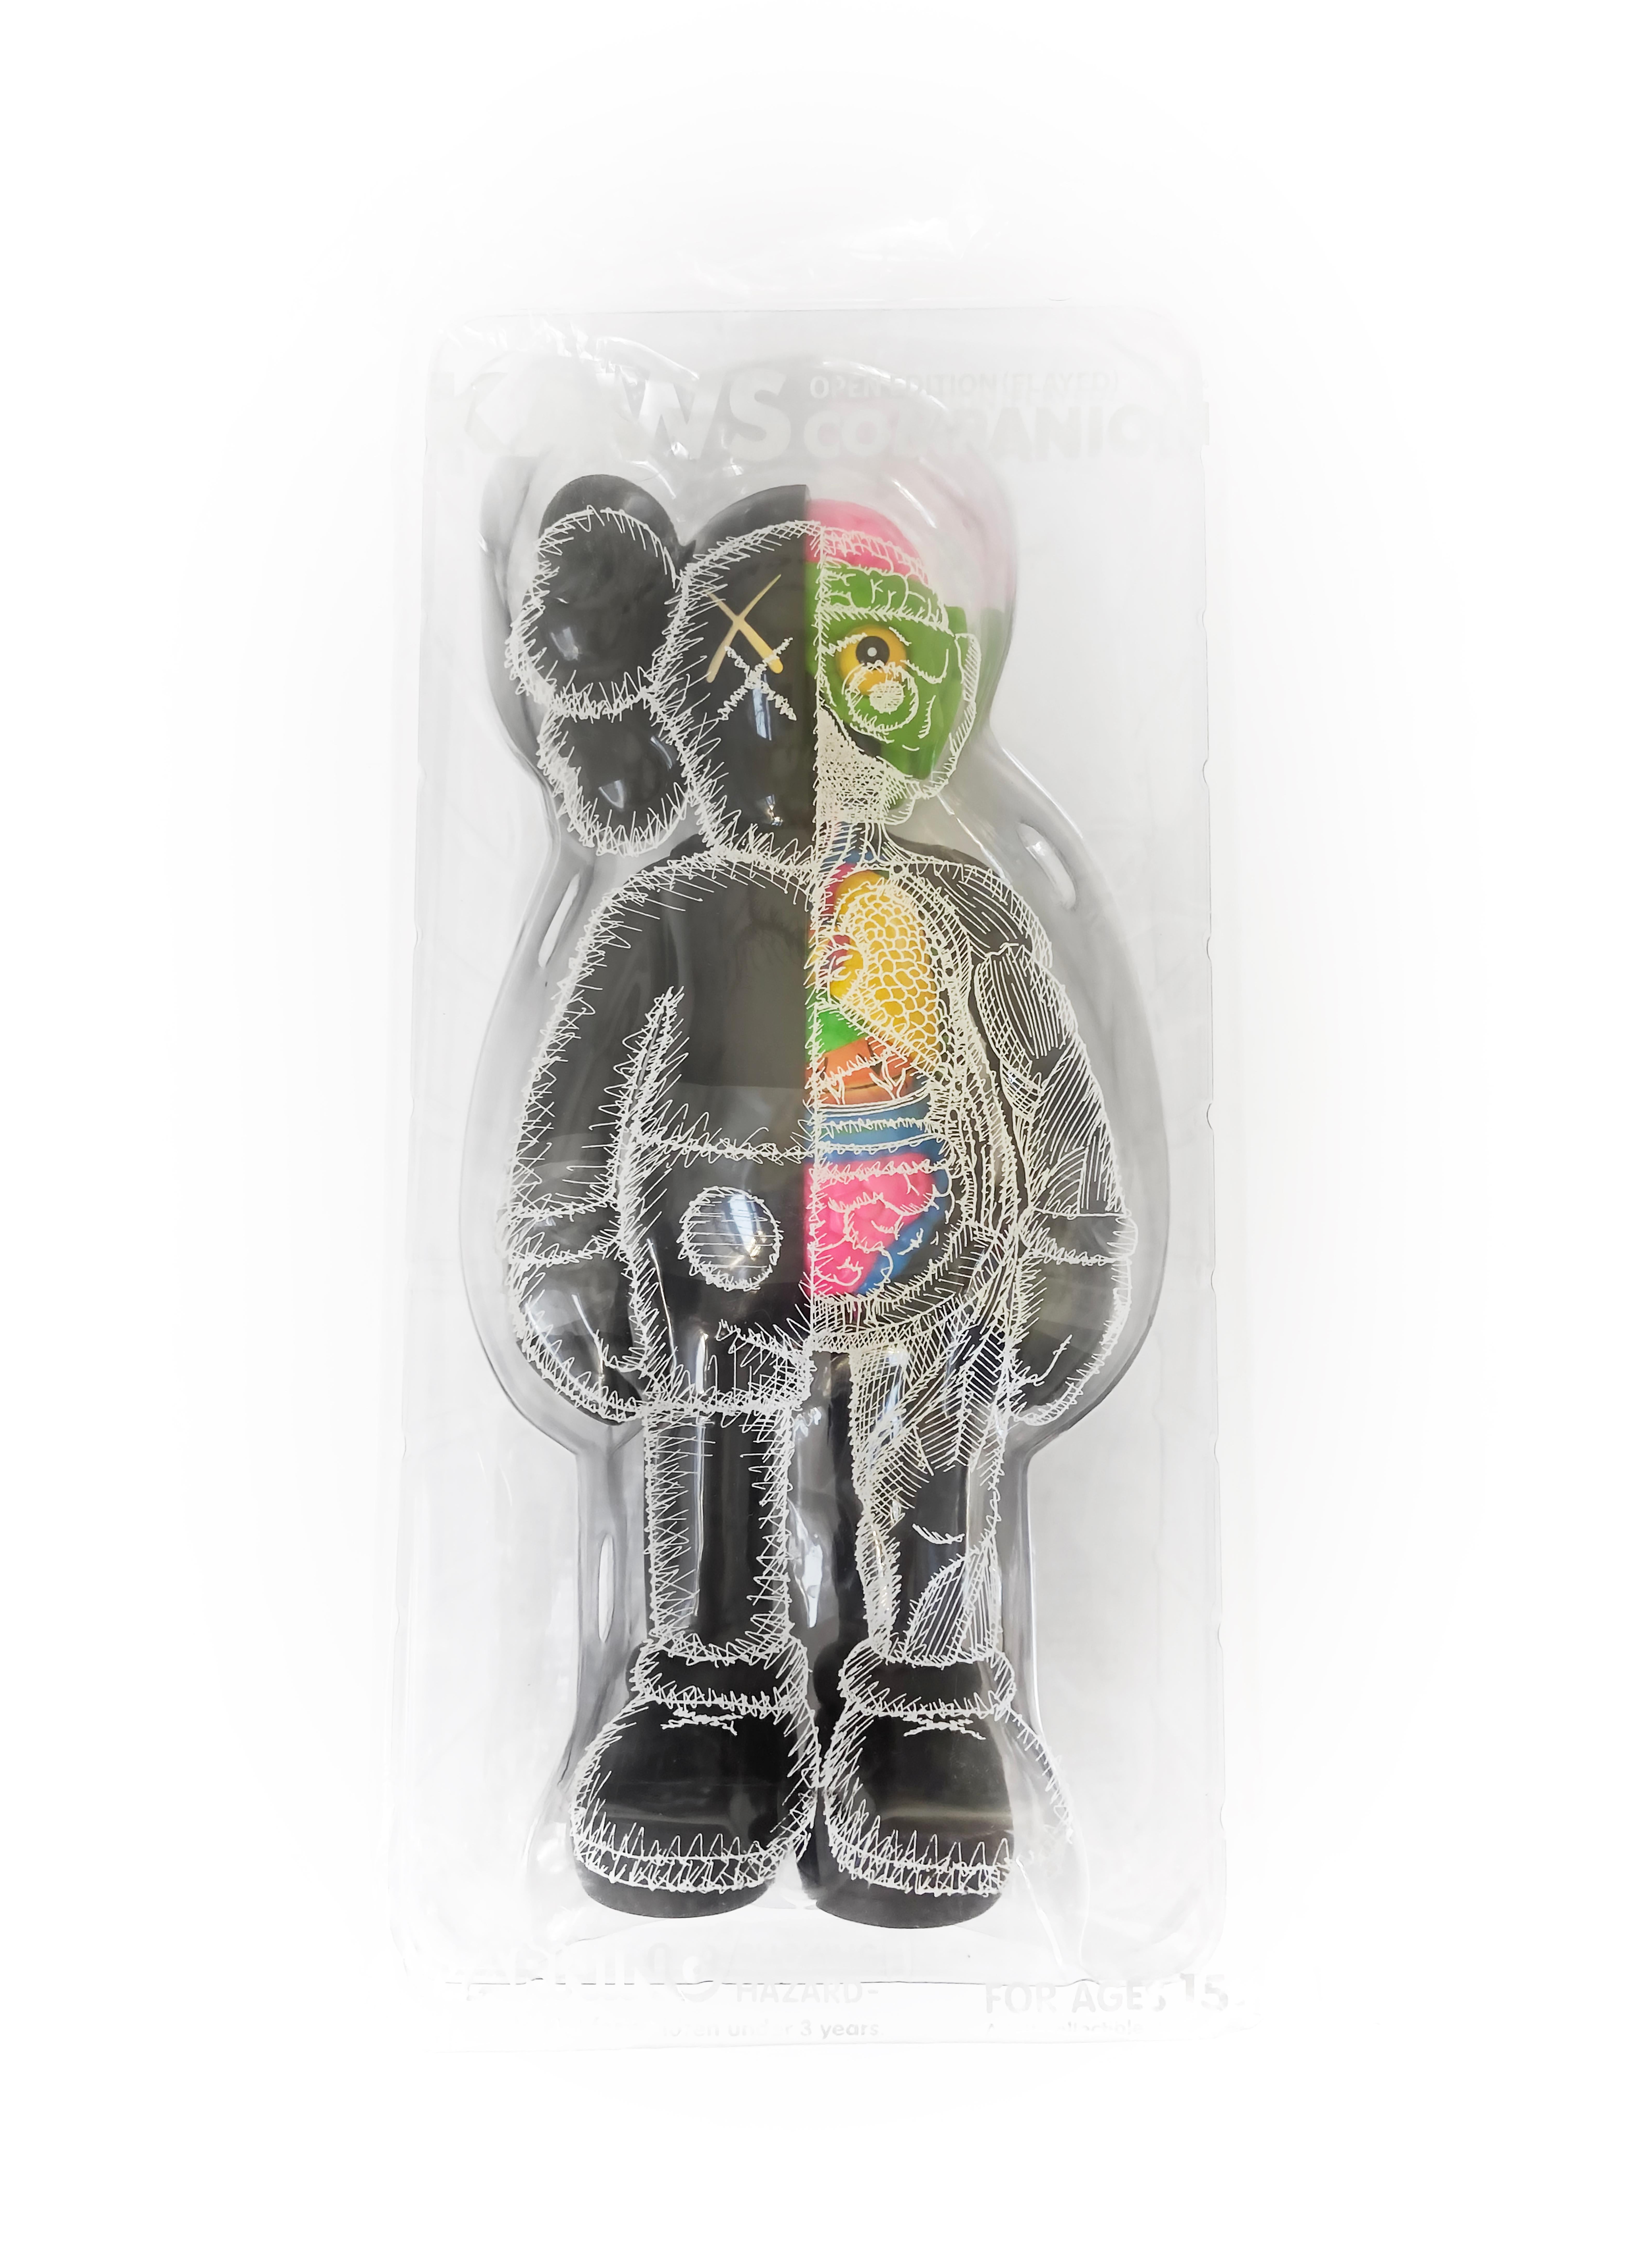 KAWS Companion 2016: Set of 6 works. Each new and sealed in original packaging. Published by Medicom Japan in conjunction with the exhibition, KAWS: Where The End Starts at the Modern Art Museum of Fort Worth. These figurines have since sold out.